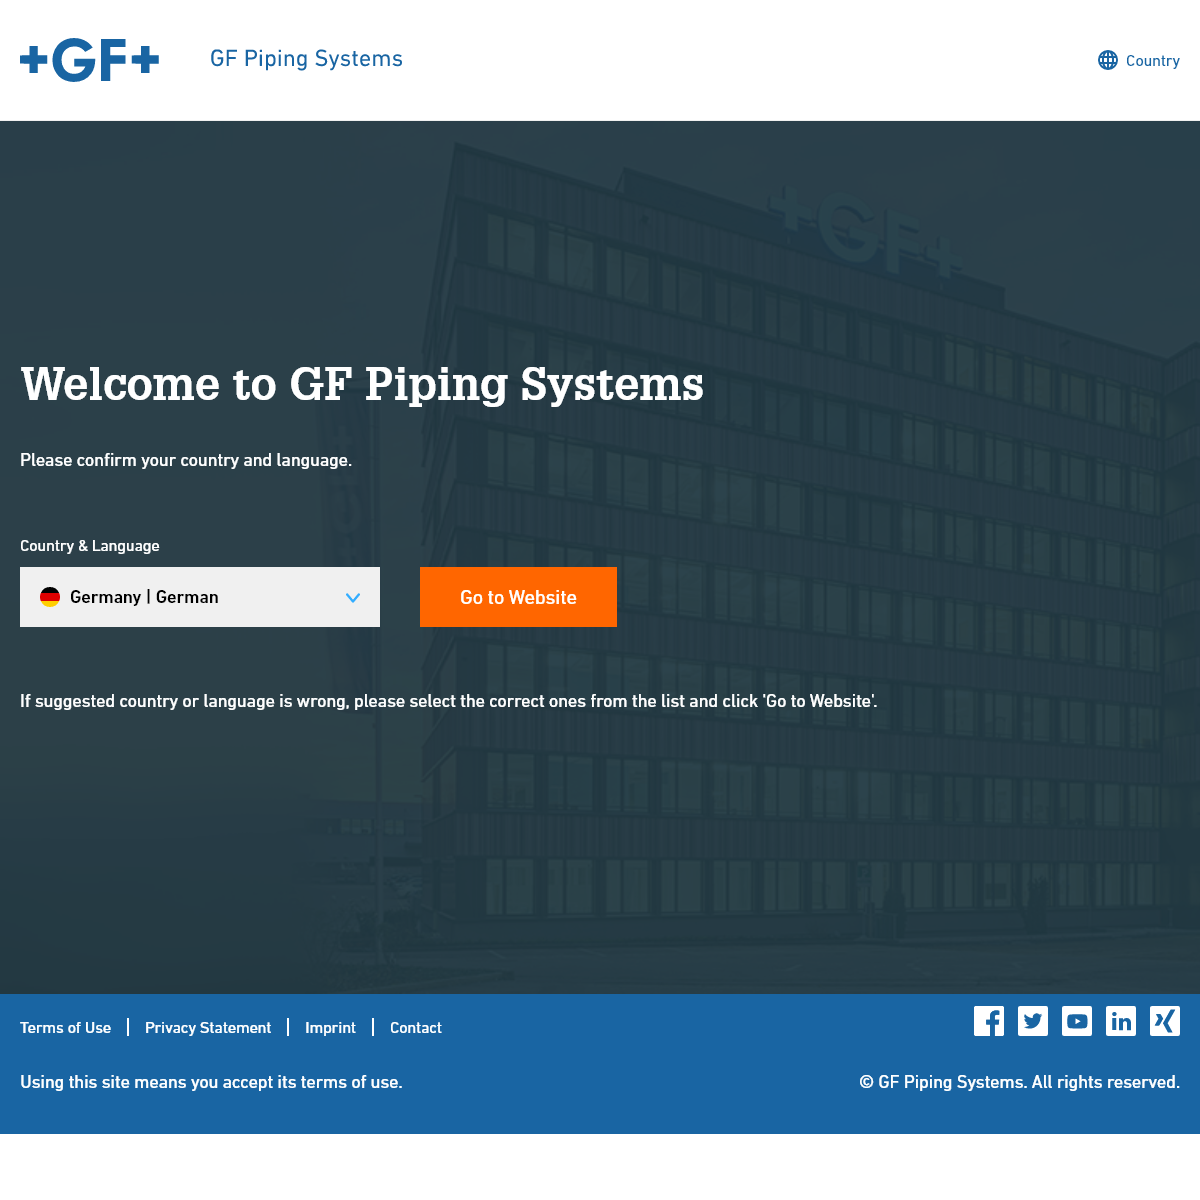 A complete backup of gfps.com